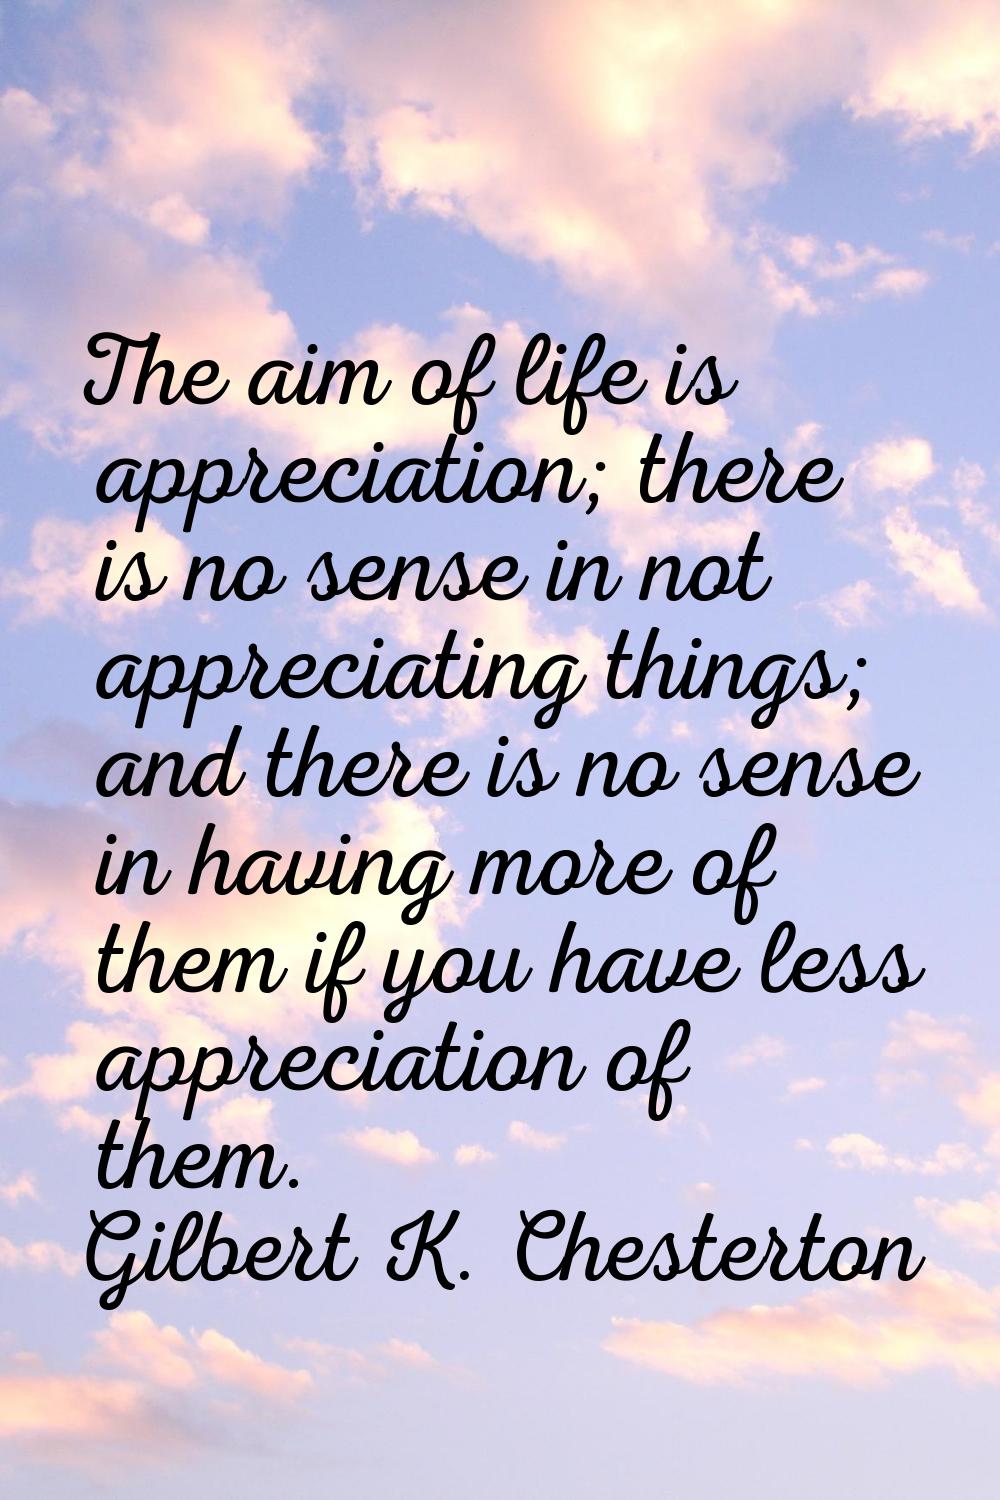 The aim of life is appreciation; there is no sense in not appreciating things; and there is no sens